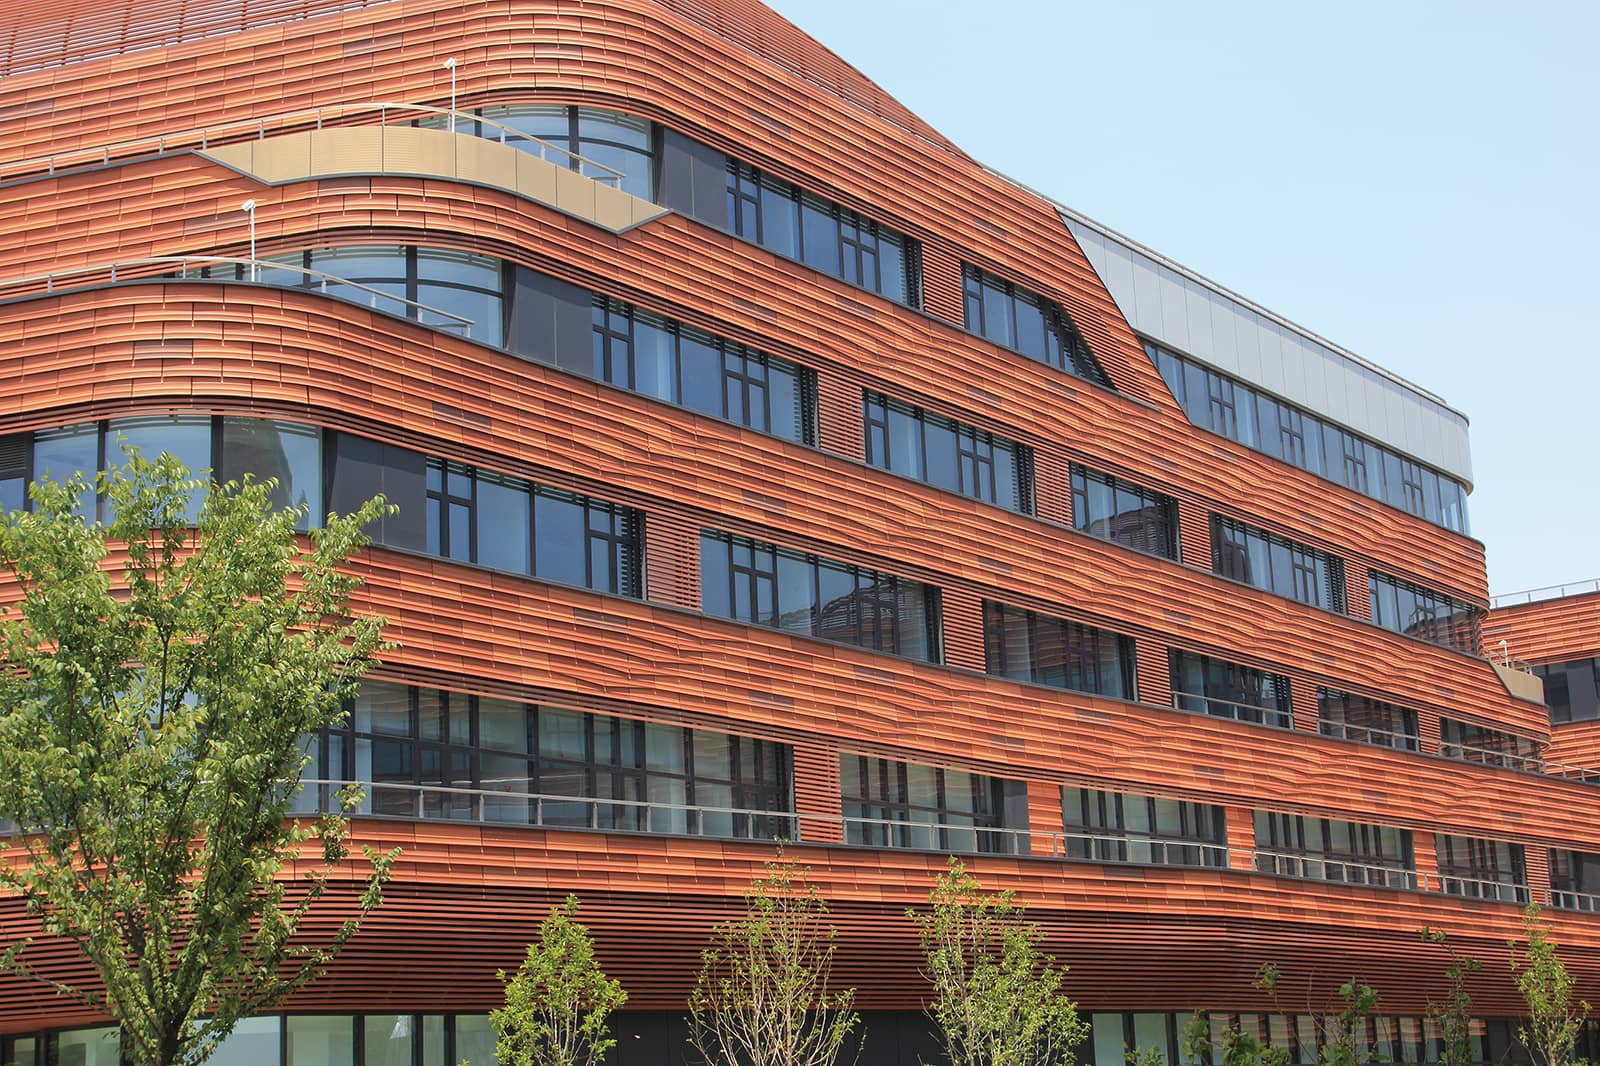 Hospital Facades in LOPO Special wavy-textured terracotta panels.jpg